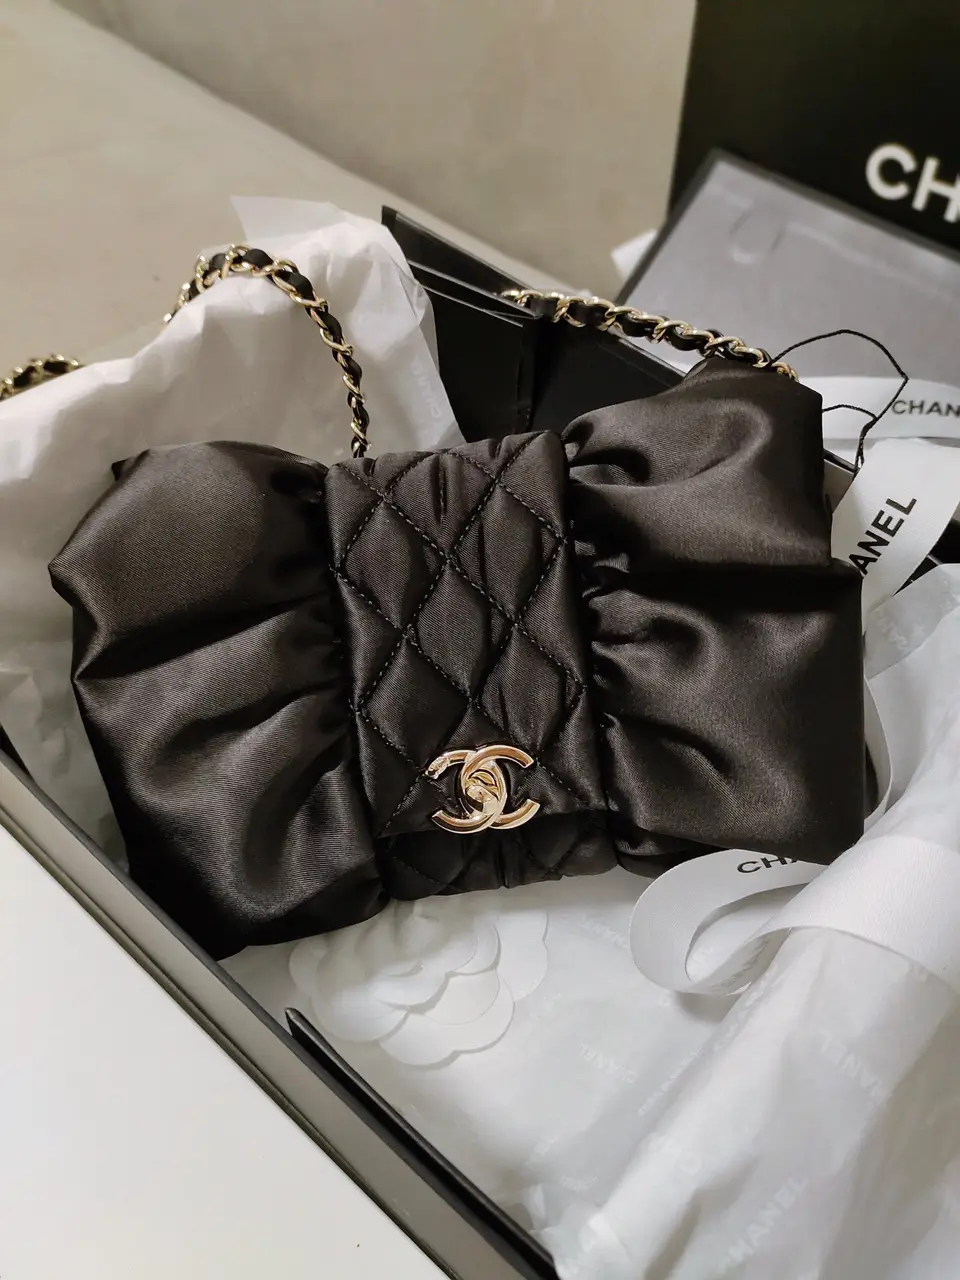 Chanel 23a Bow dinner bag💋💋, Gallery posted by Vivian💗💗💗